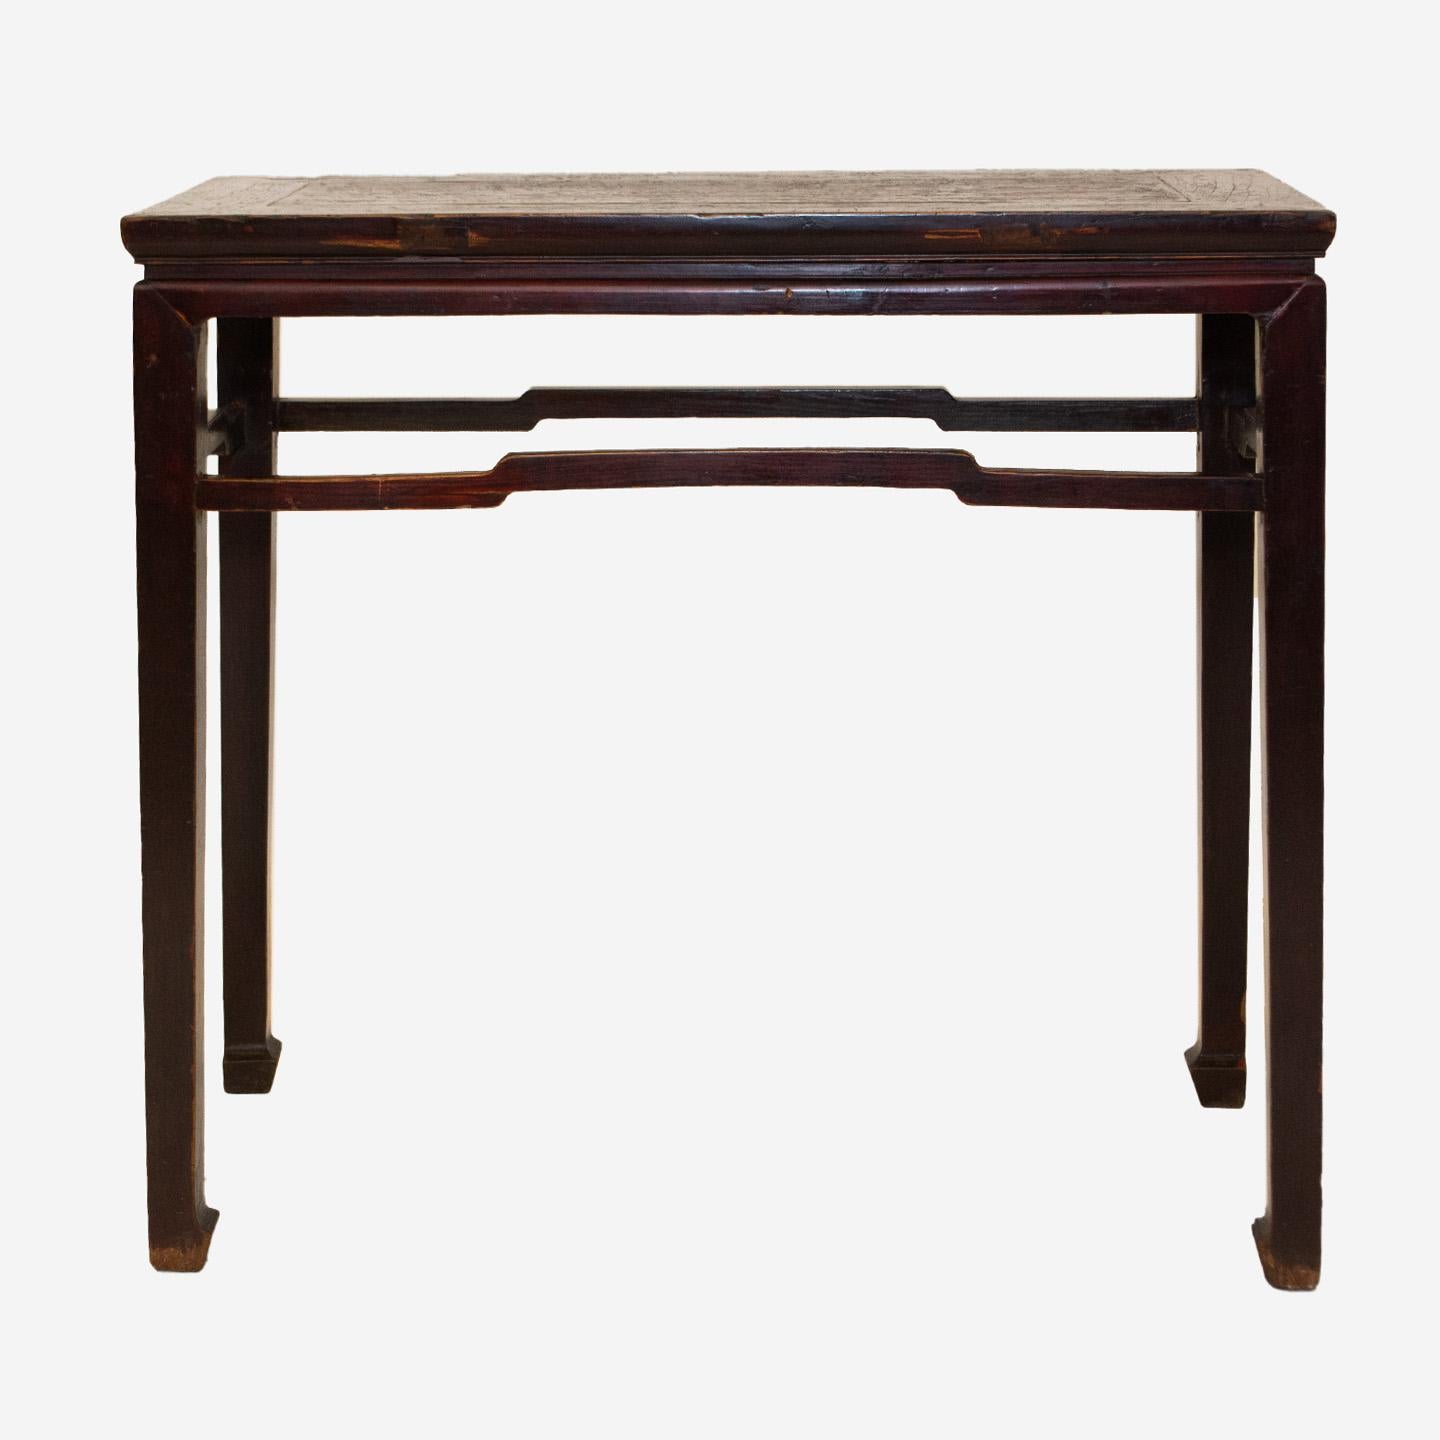 Created in China during the Qing Dynasty, this 19th century Elmwood wine console table features a rectangular top with central board, sitting above a waisted apron. Raised on four straight legs with horse hoof feet connected to one another through